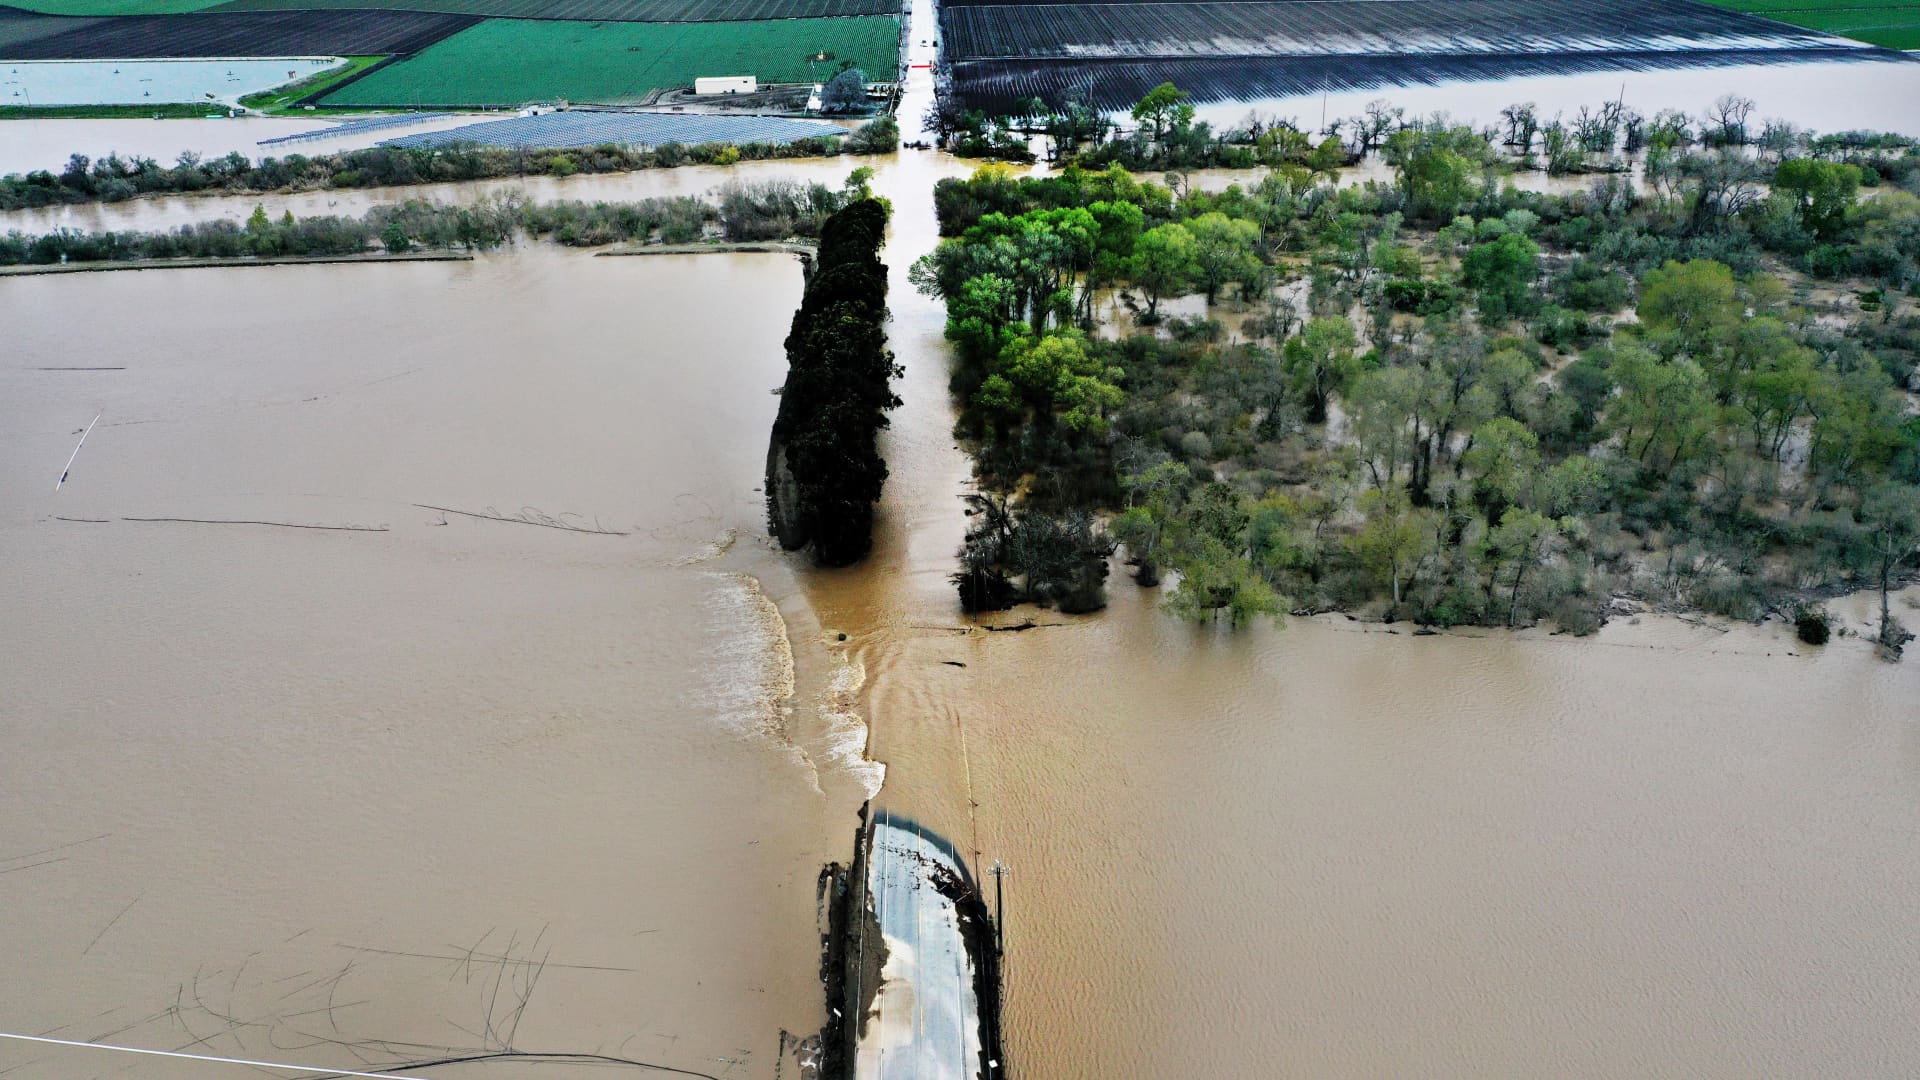 Strawberry fields and roads fill with flood waters as the Salinas River overflows breaking through levies during an atmospheric river storm which is again slamming California in Salinas, California on Tuesday March 14, 2023.